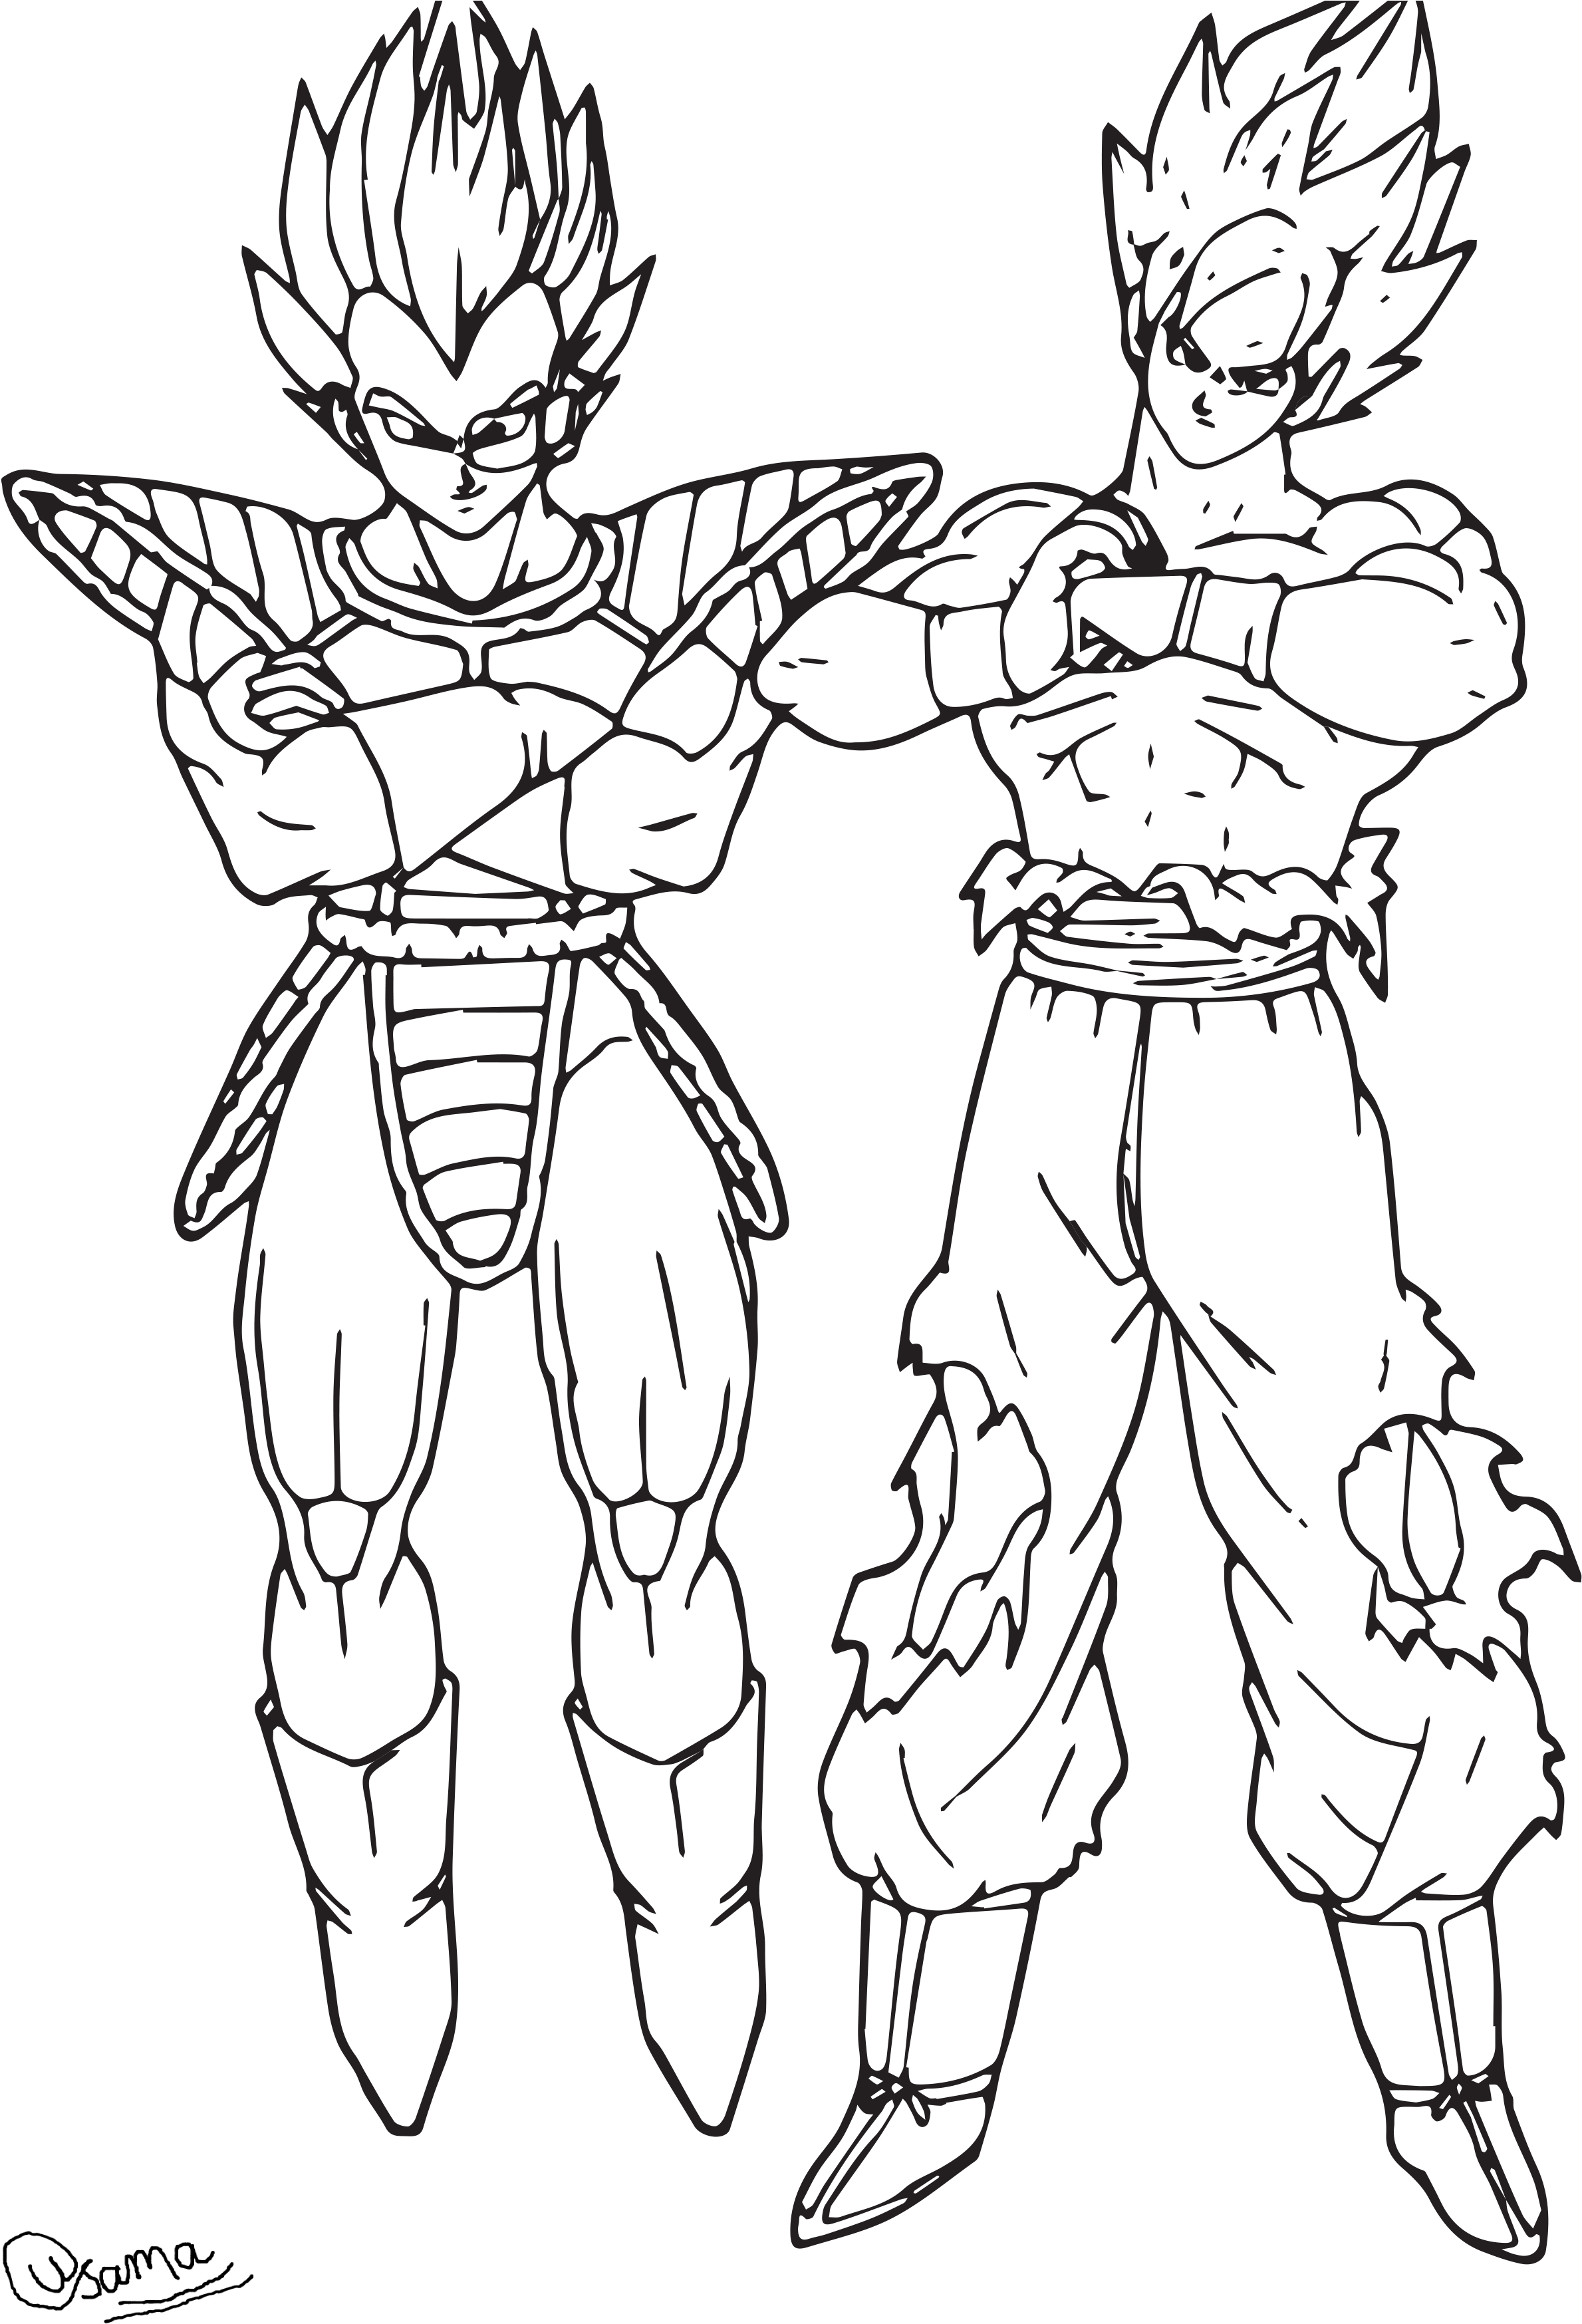 Download Raditz And Goku - Dragon Ball Goku Coloring Pages PNG Image with  No Background - PNGkey.com